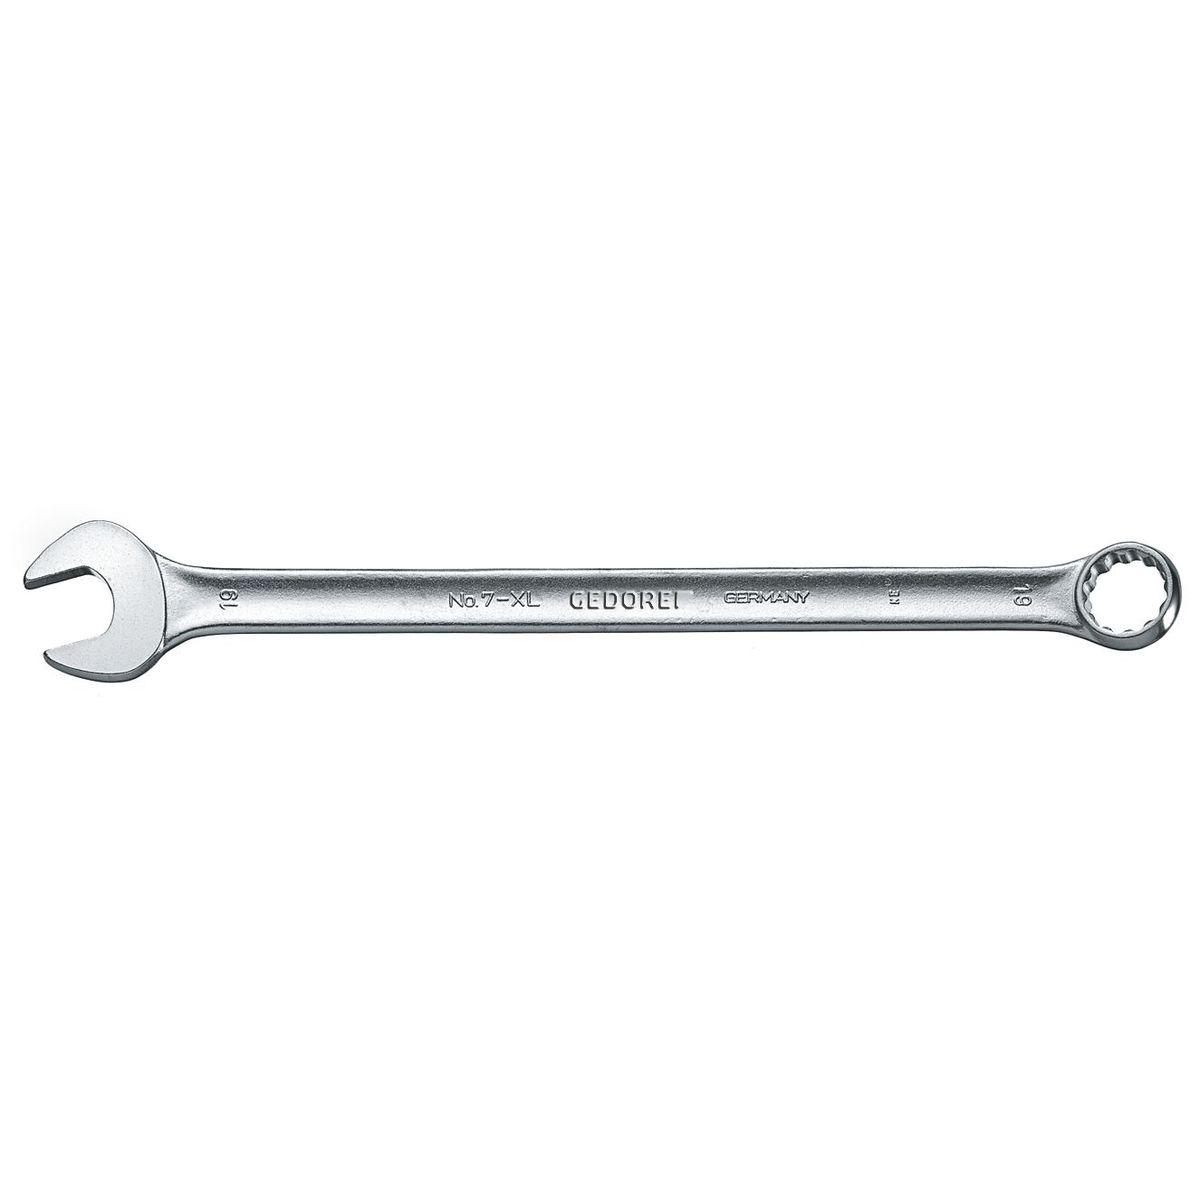 Combination spanner, extra long 46mm No.7 XL 46 Gedore